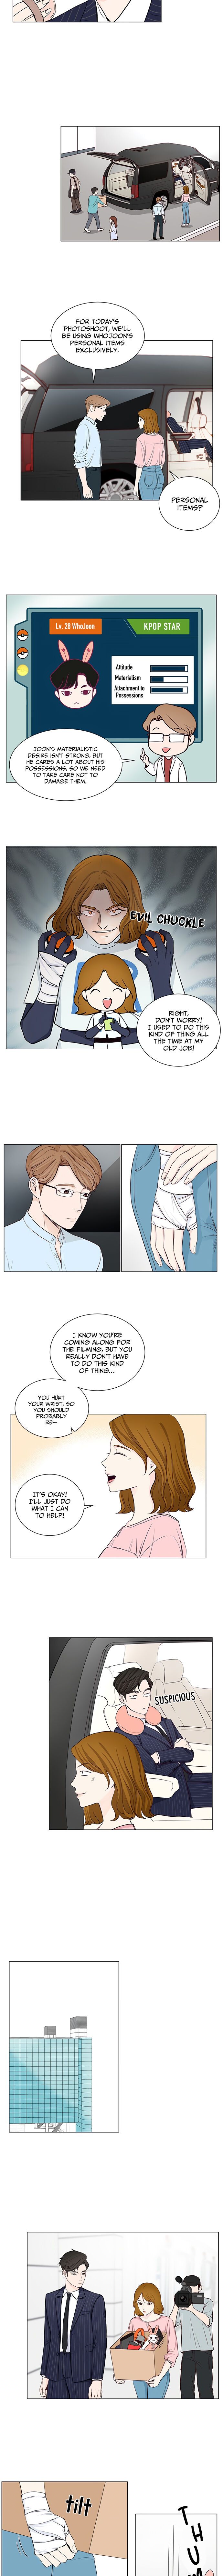 So I Married An Anti-Fan Chapter 032 page 3